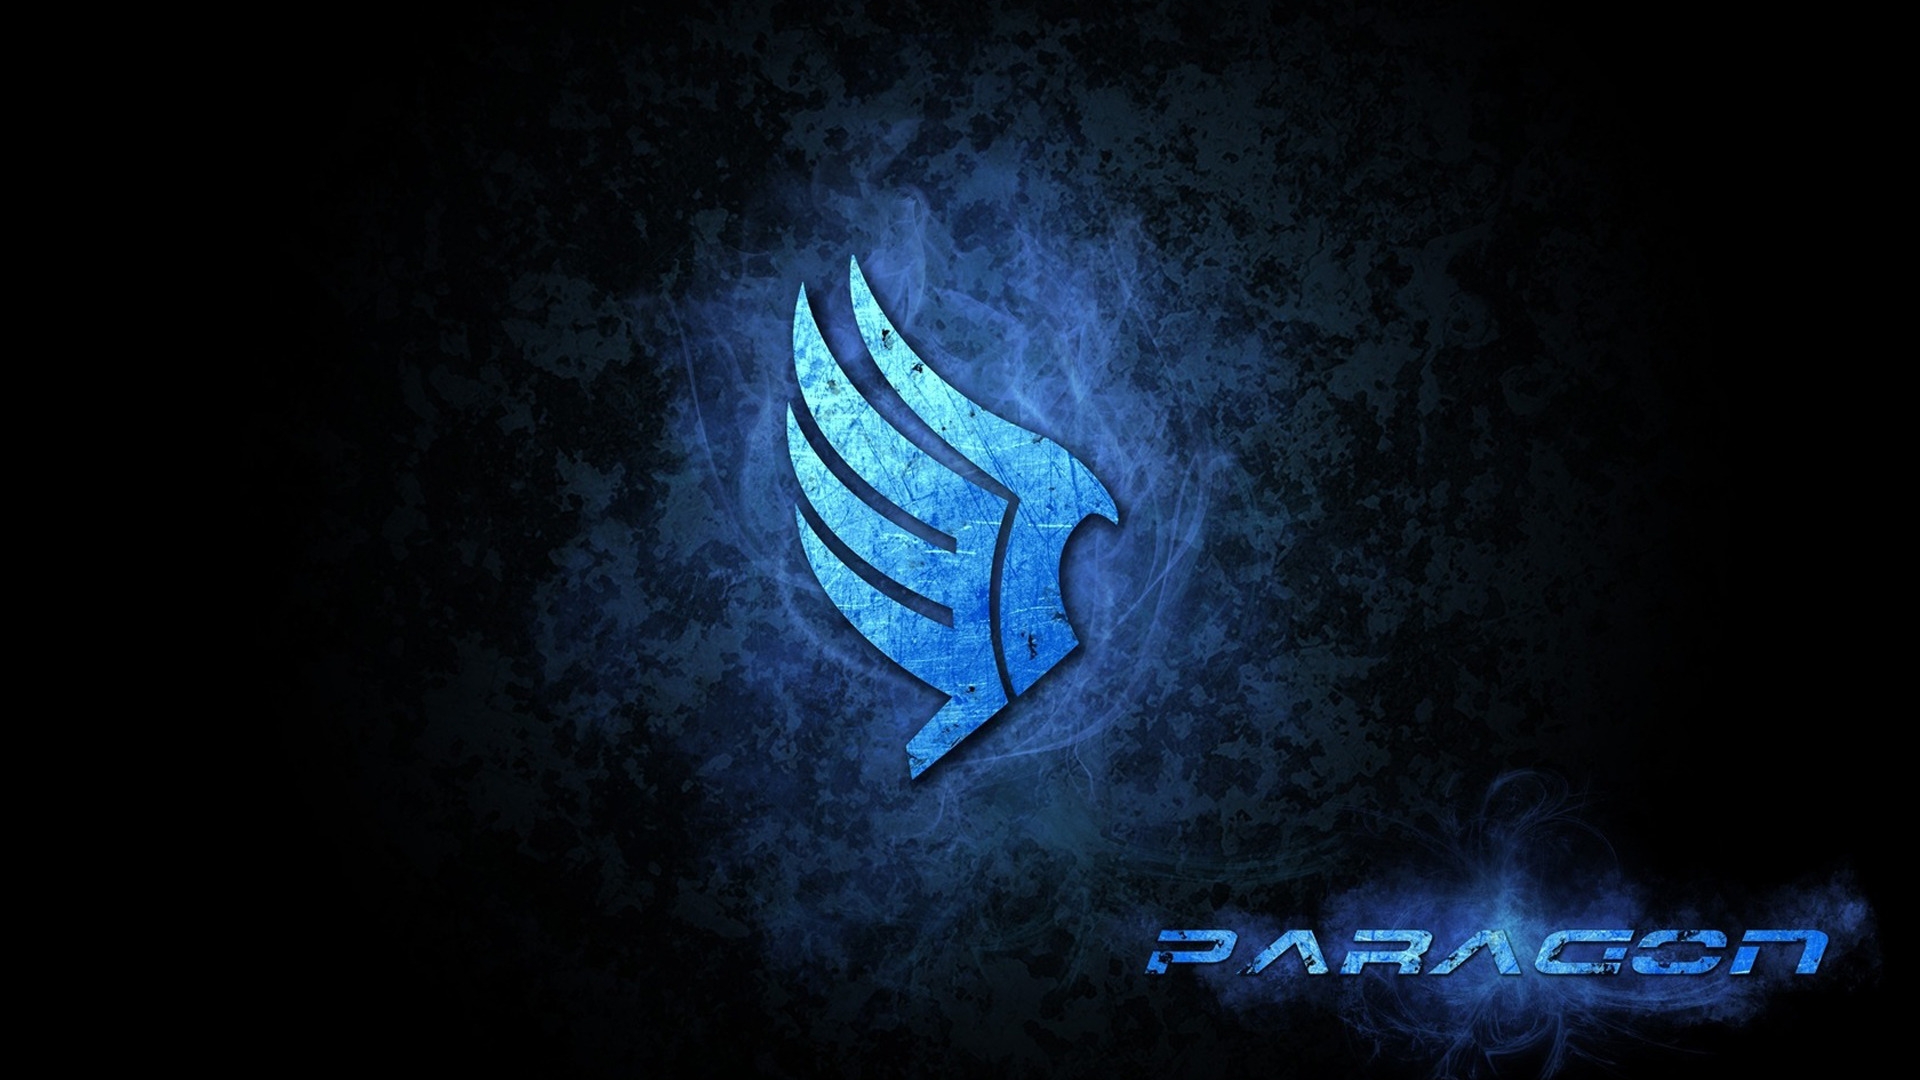 Paragon for 1920 x 1080 HDTV 1080p resolution